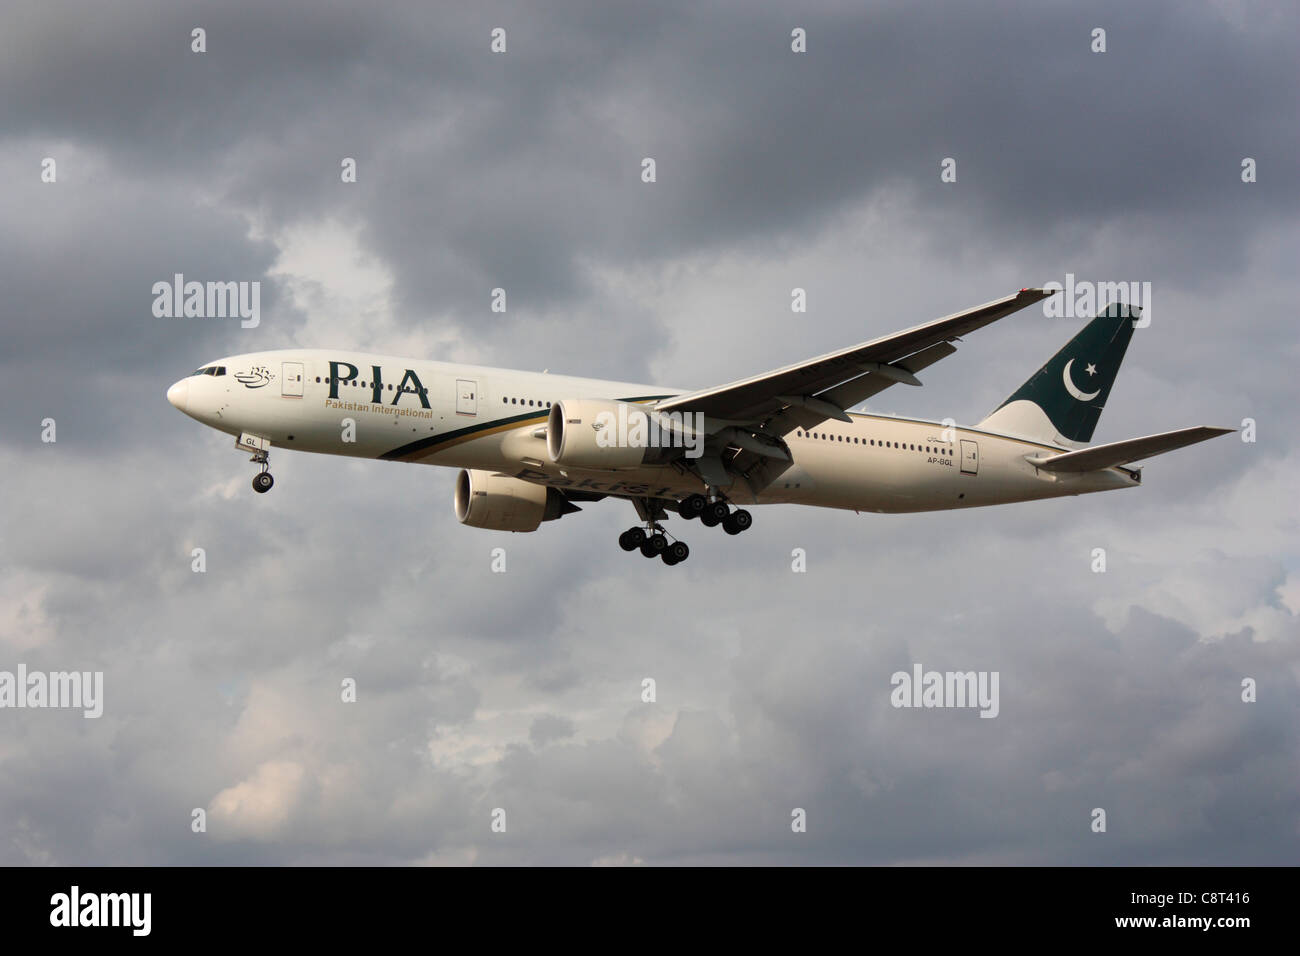 PIA Pakistan International Airlines Boeing 777-200ER on approach against a cloudy sky Stock Photo